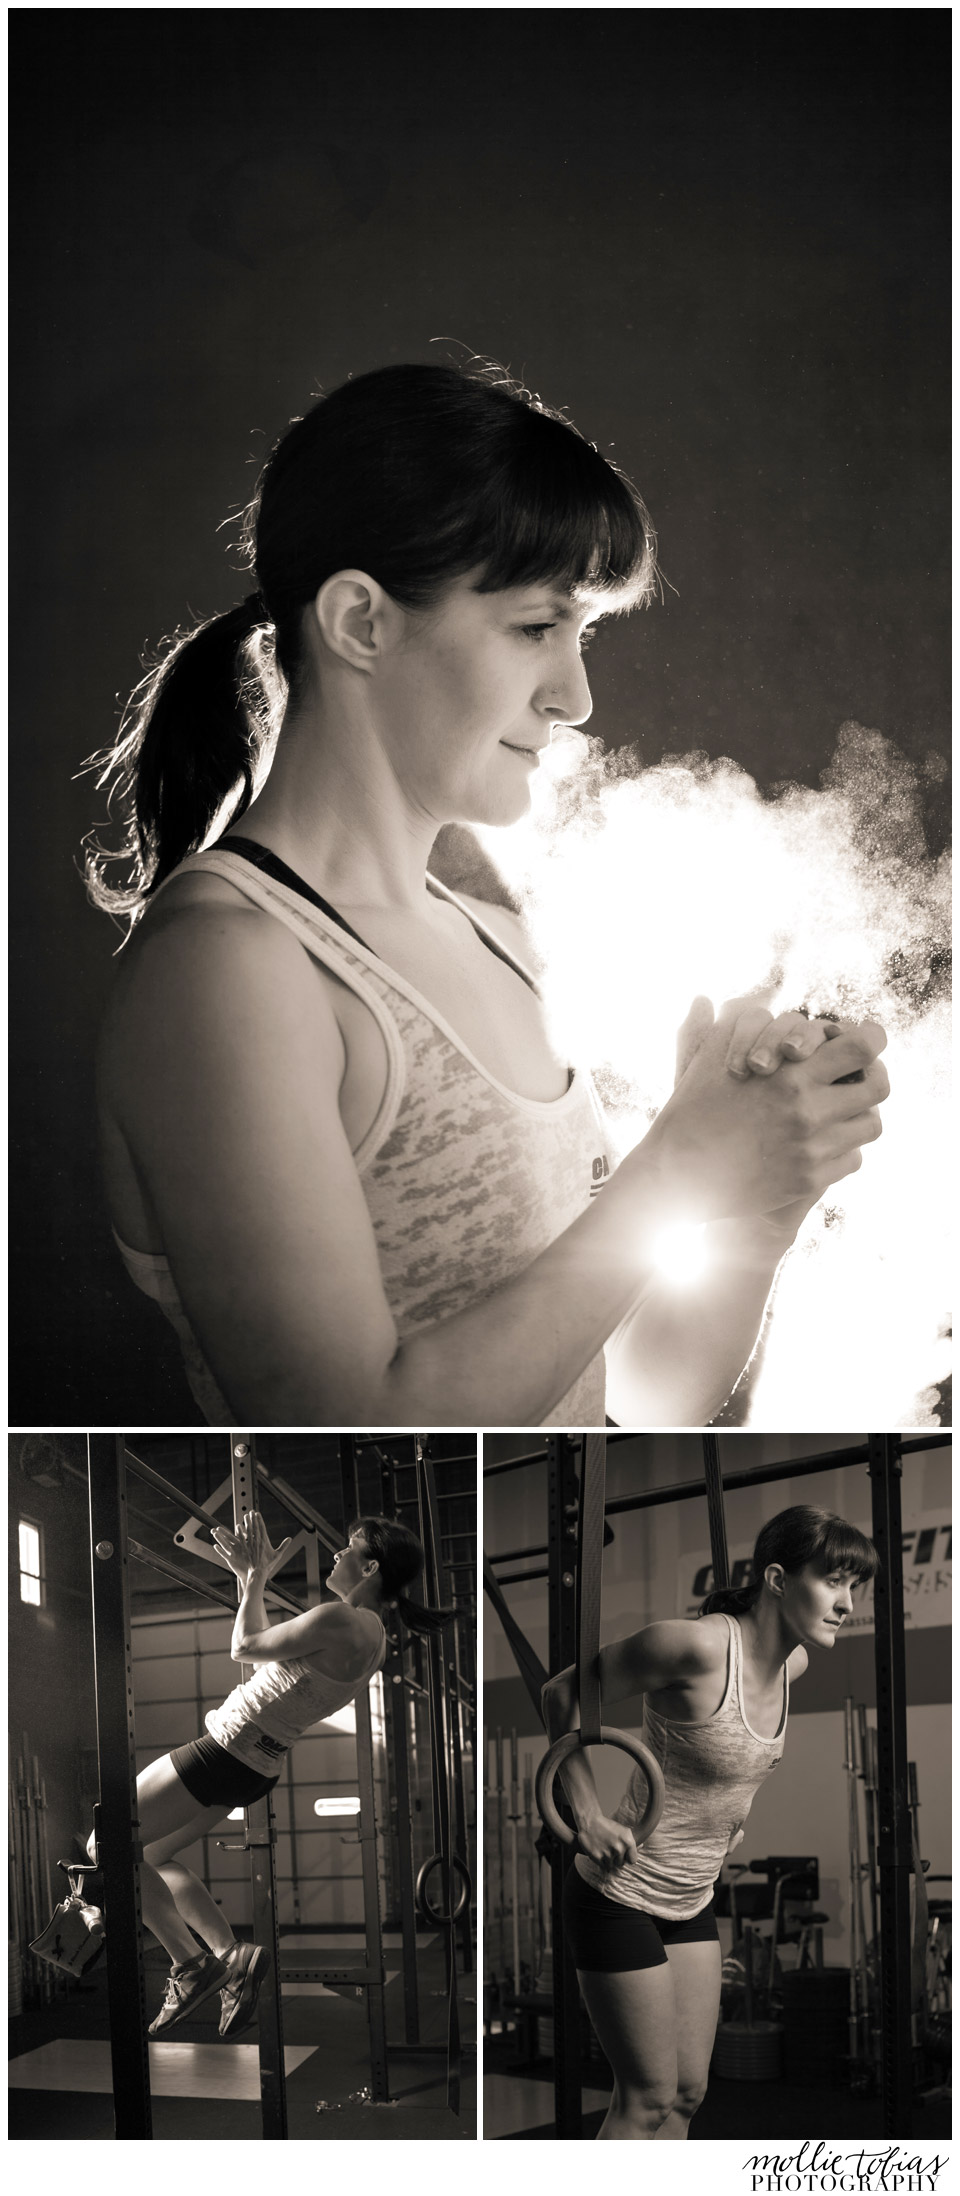 I am CrossFit - Mollie Tobias Photography Virginia Sports Photography #goals #motivation #workout #fitness #crossfit